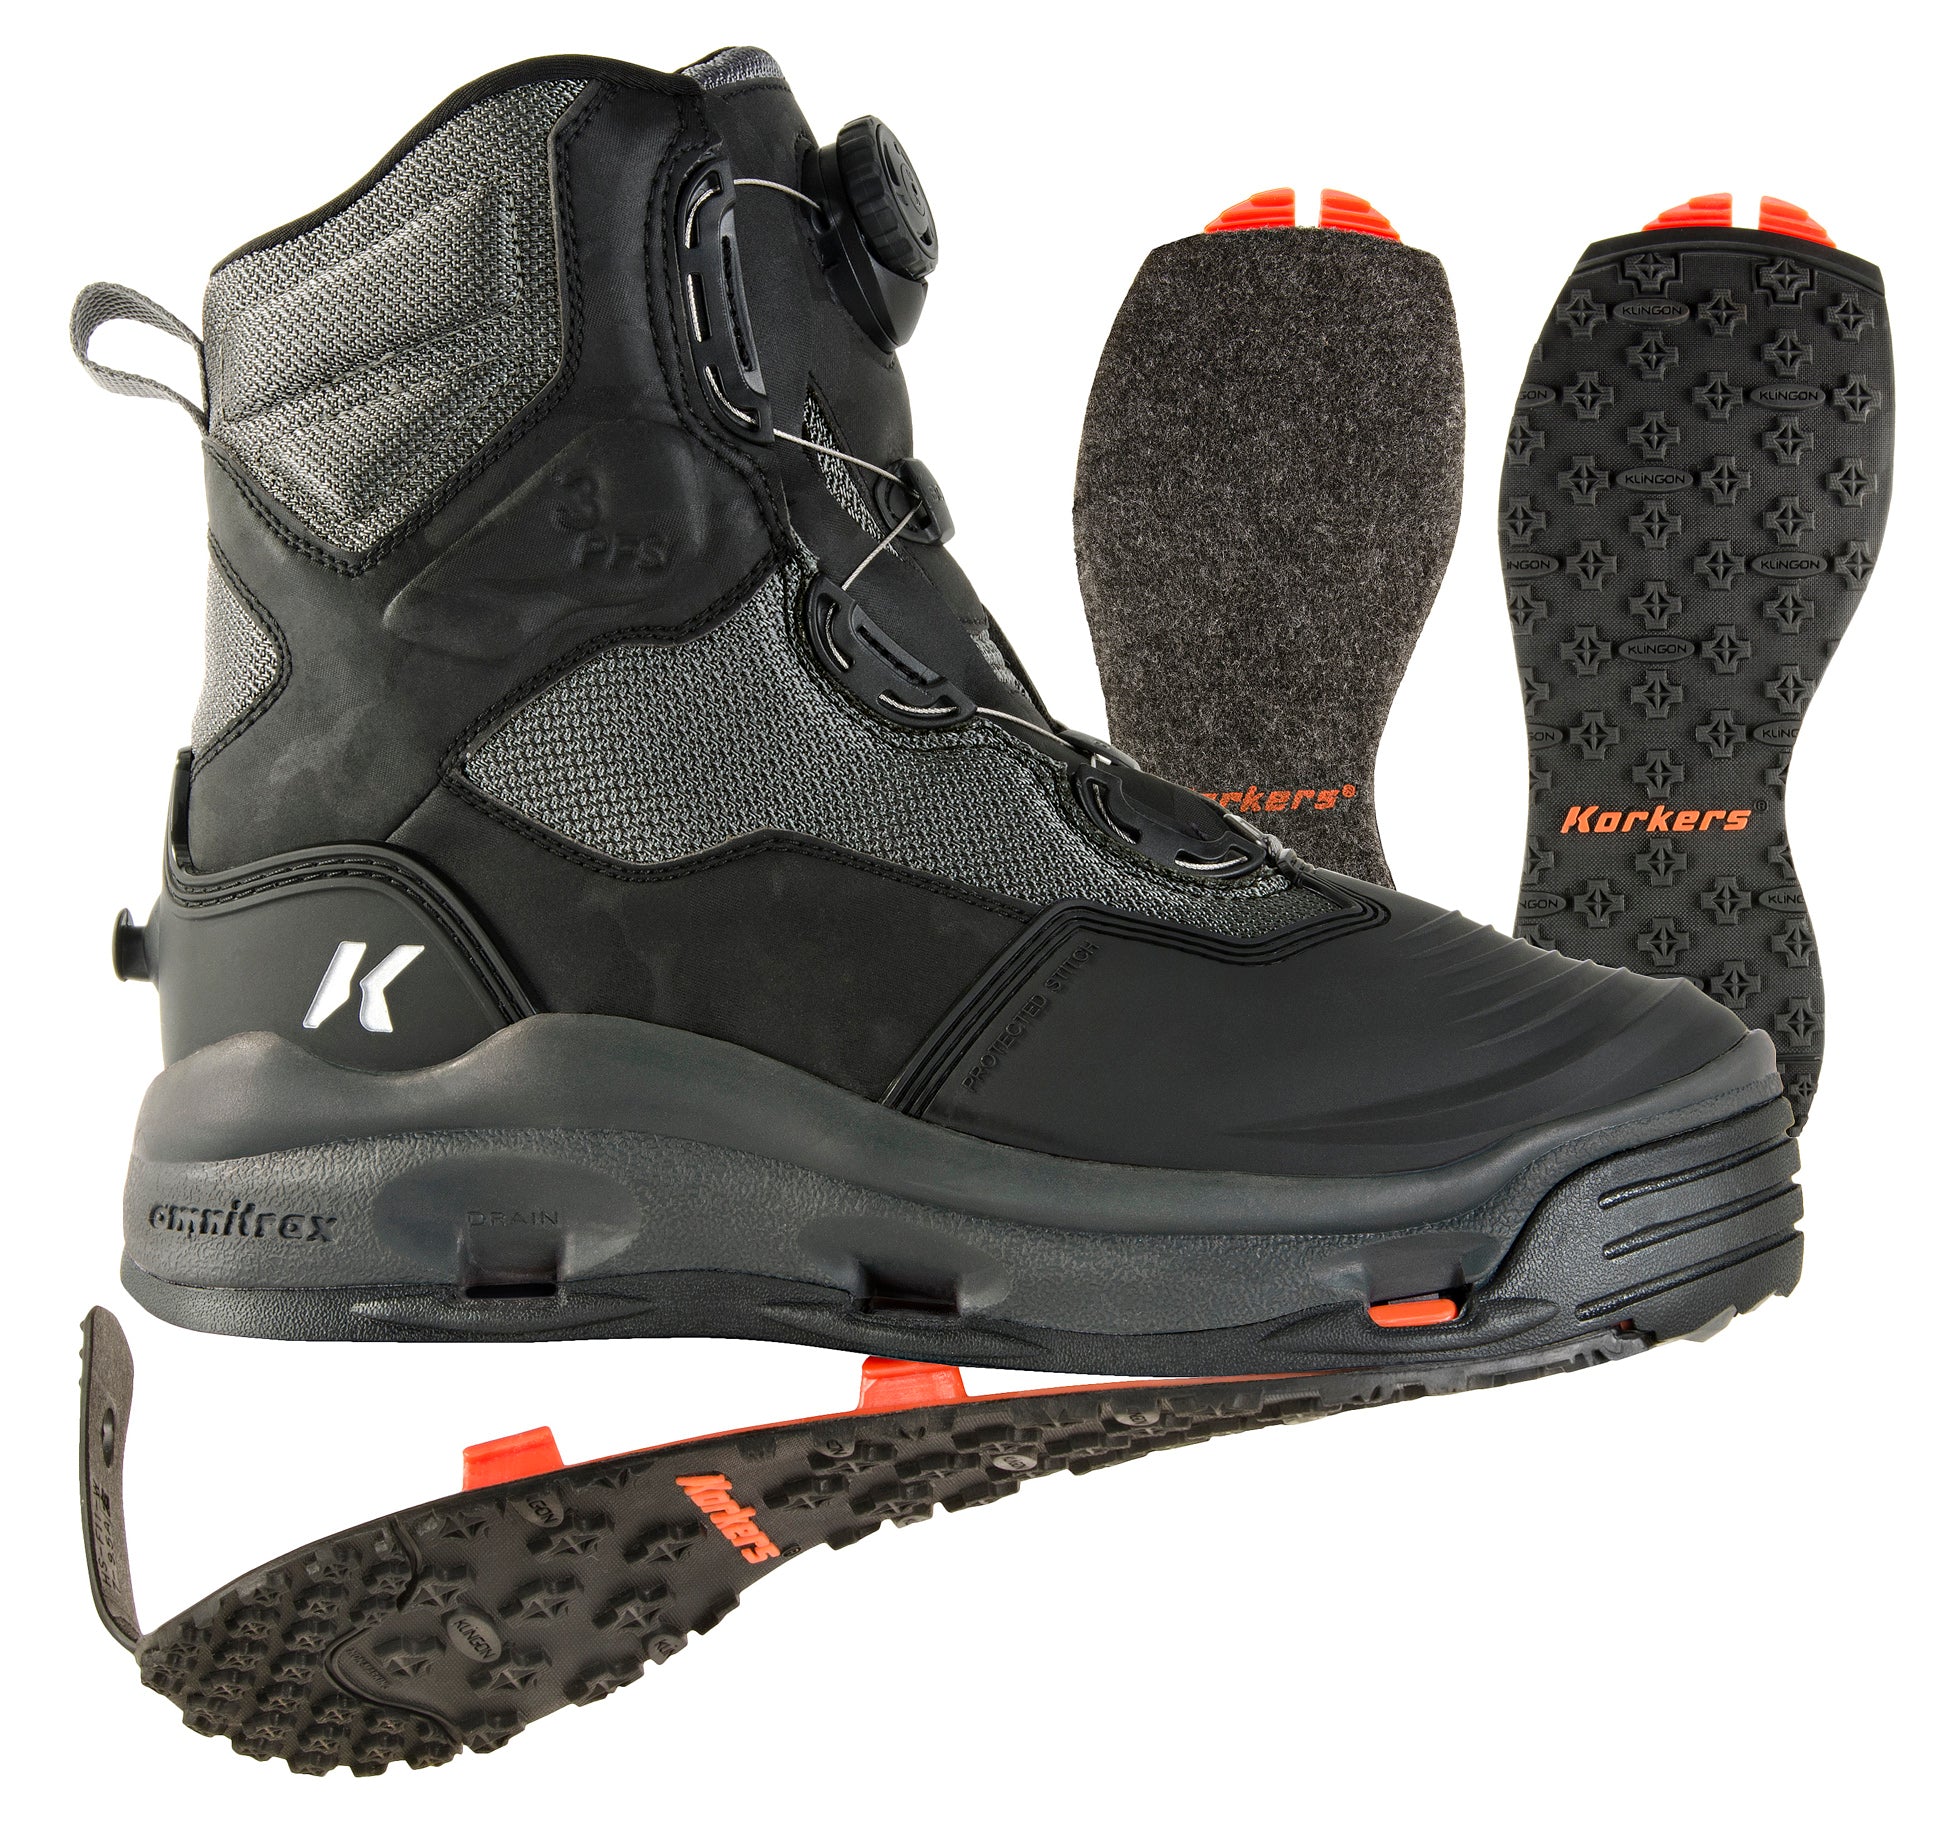 cabela's fishing boots - OFF-59% > free delivery